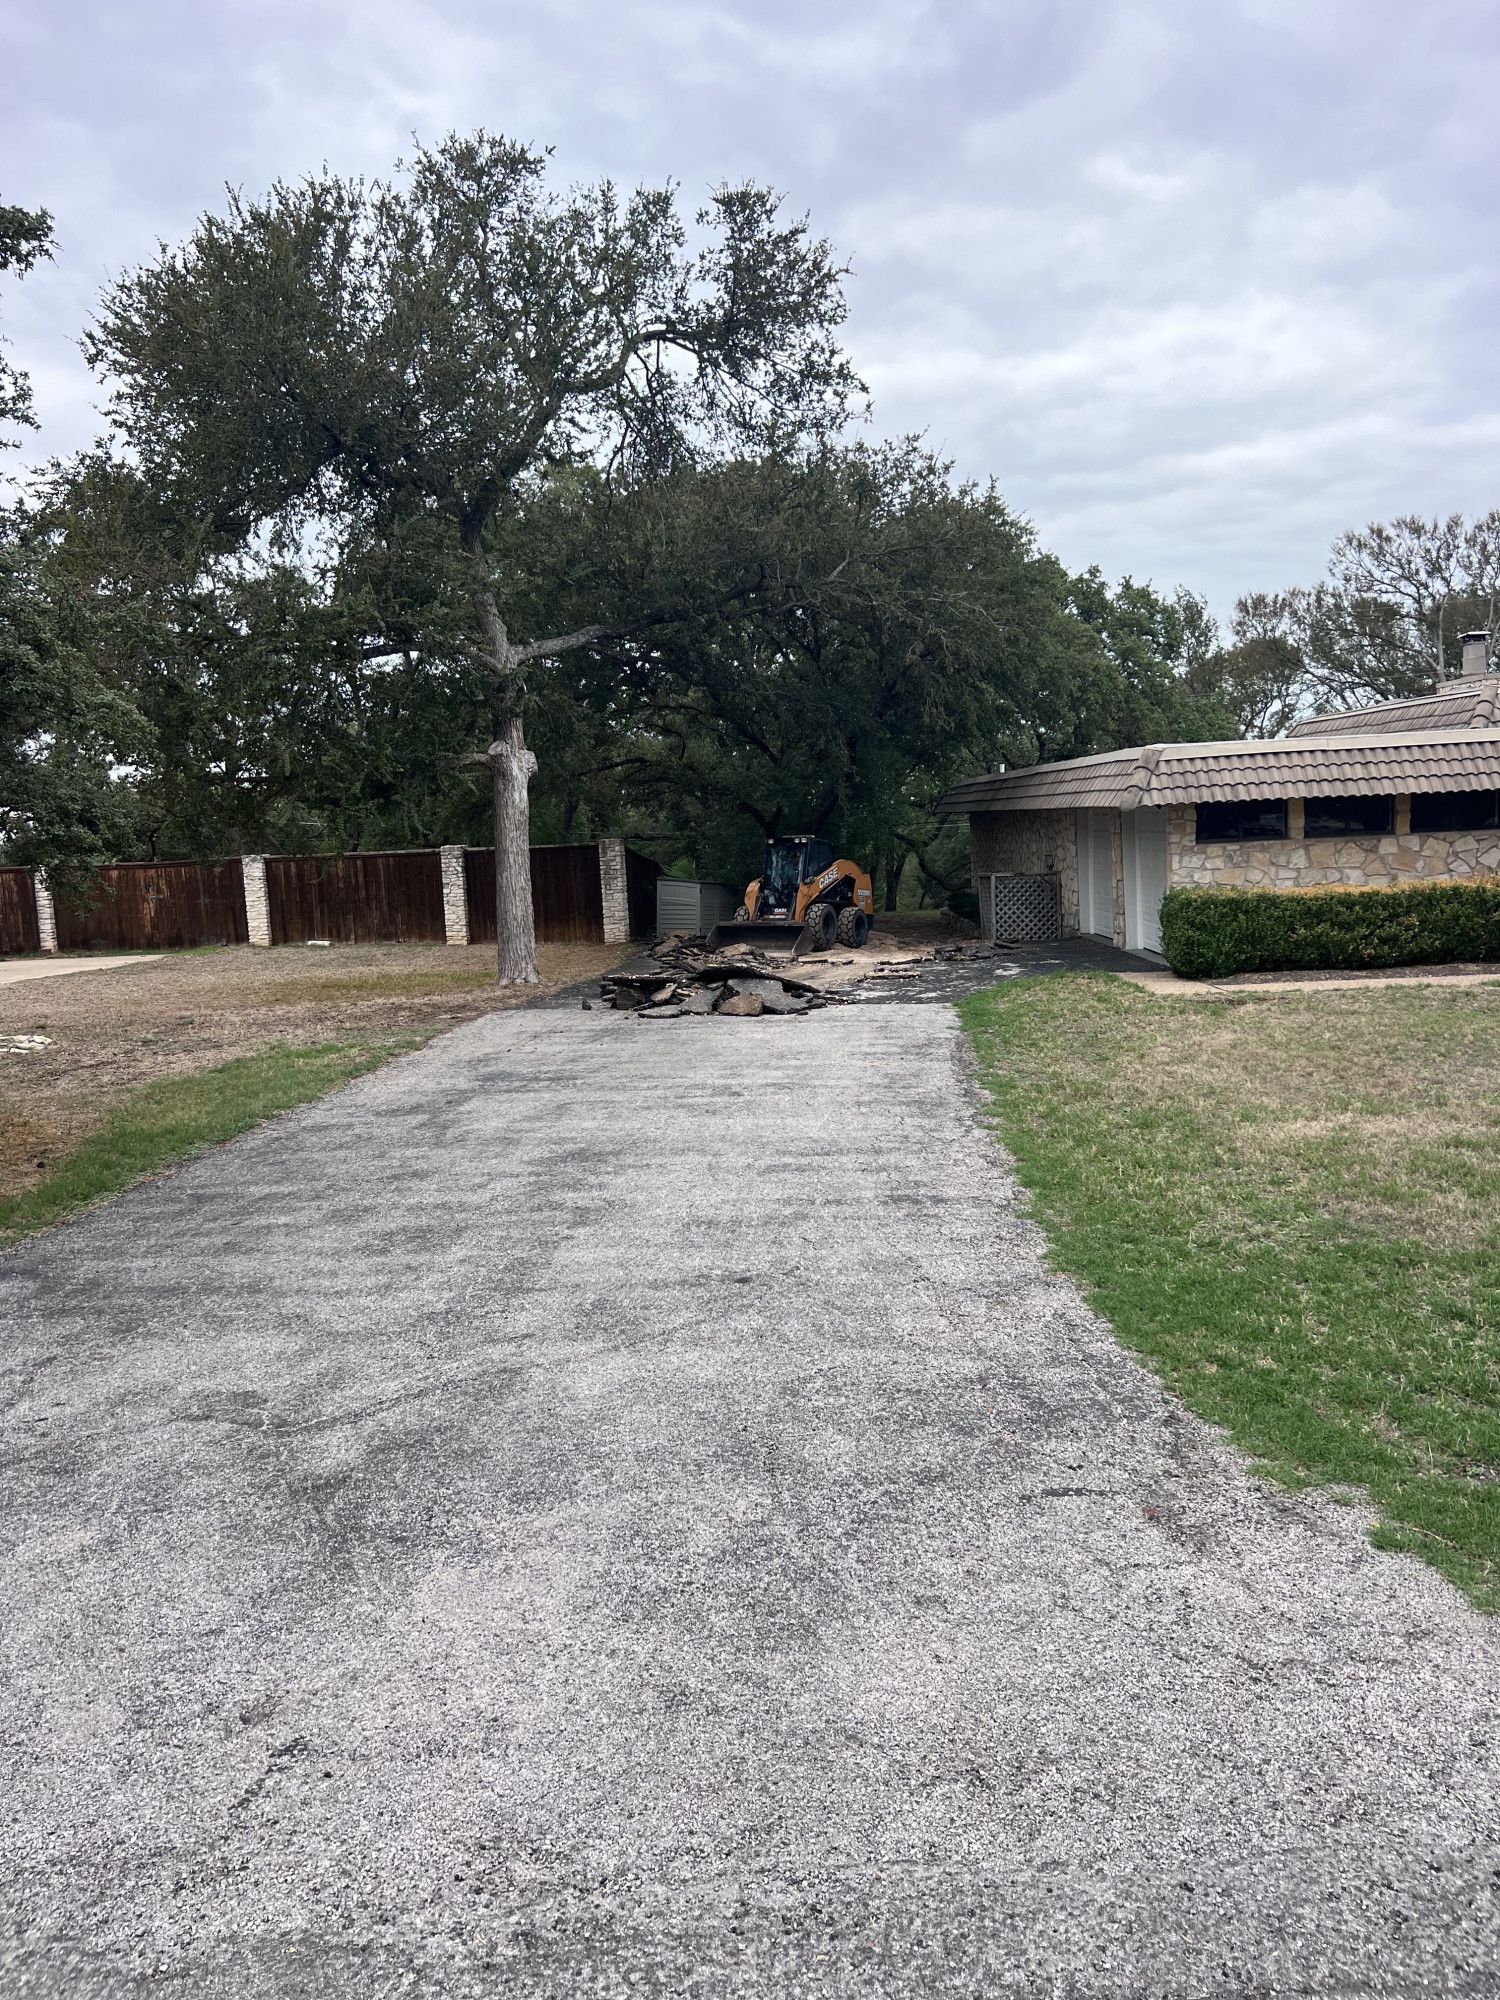 Before Image of our client's driveway repair in Austin,TX.